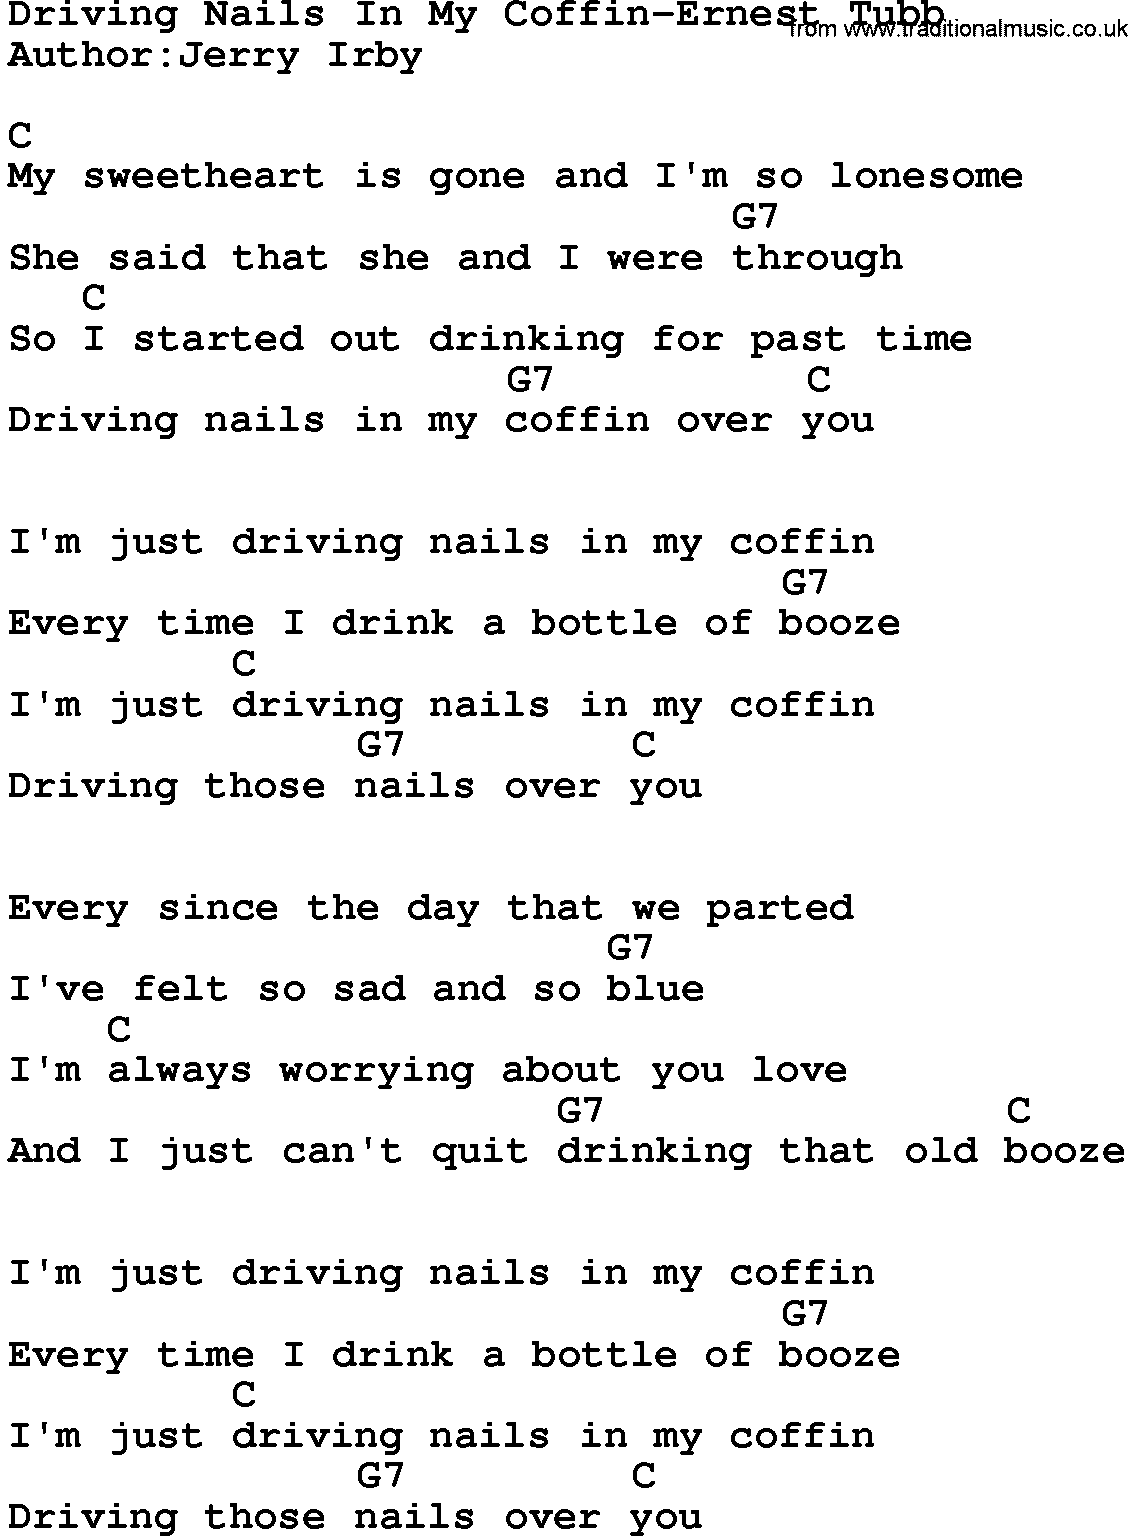 Country music song: Driving Nails In My Coffin-Ernest Tubb lyrics and chords